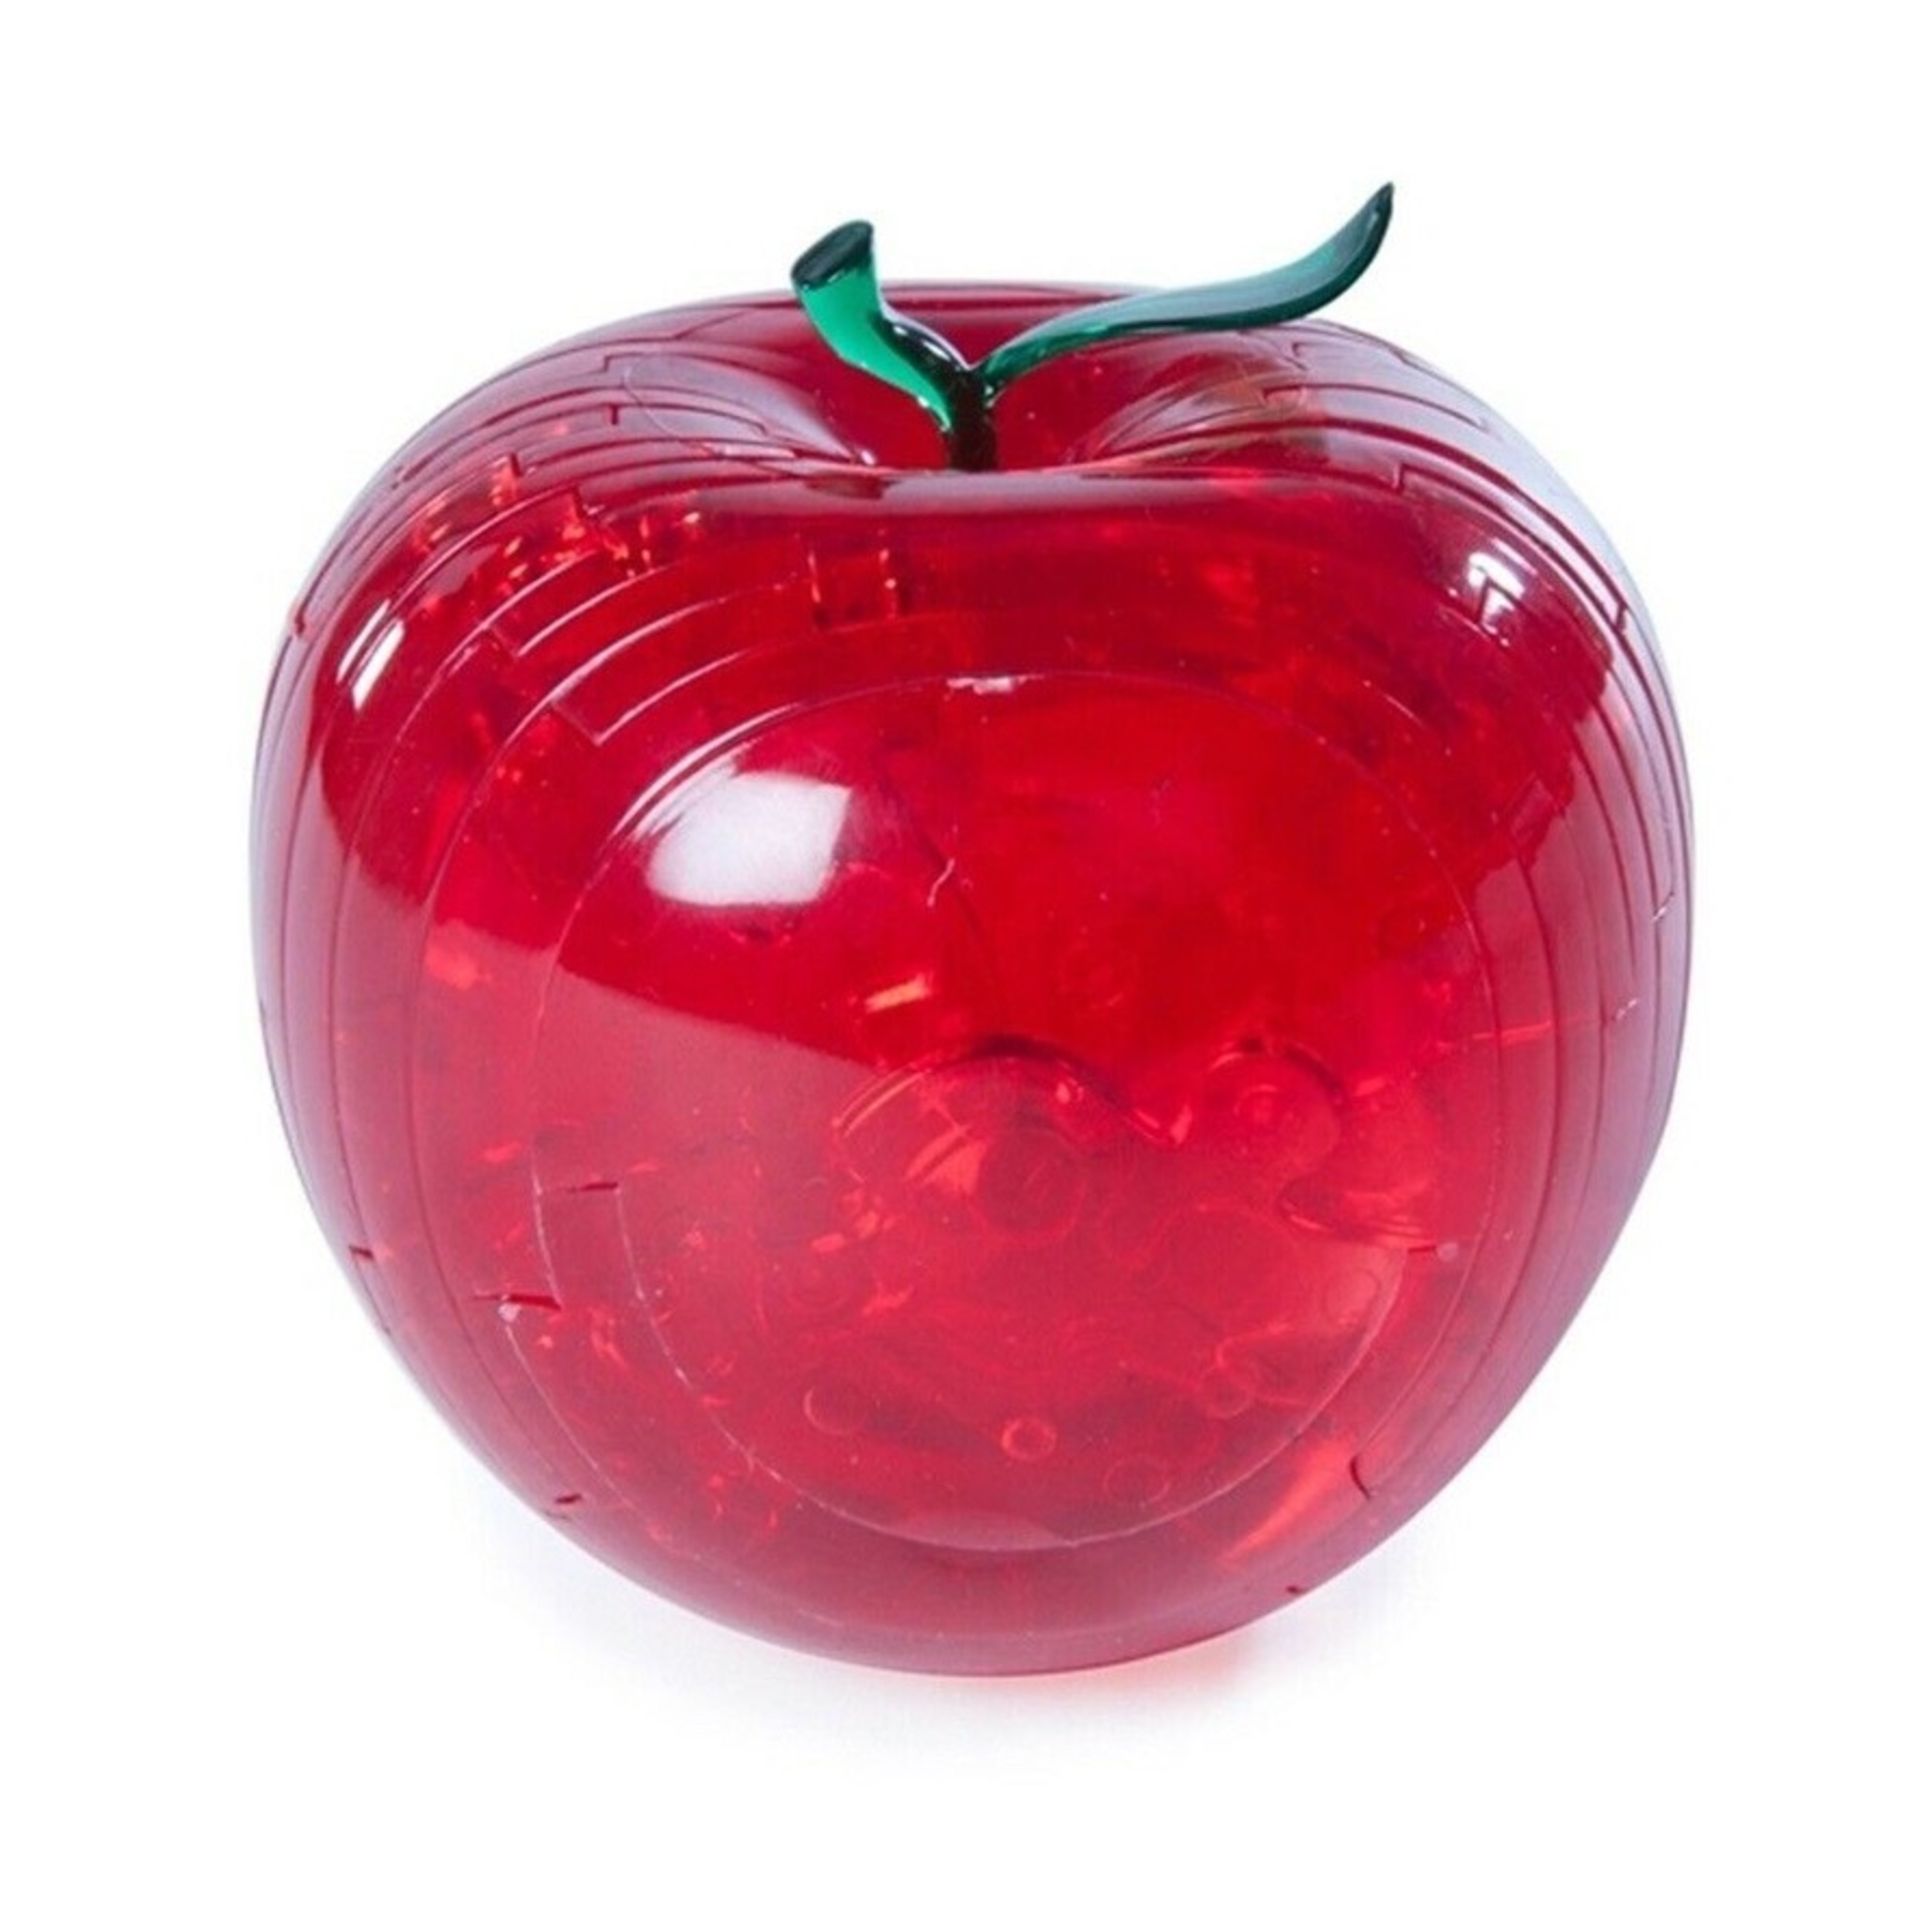 10 x 3D Jigsaw Puzzle. Red Apple with Flashing LED Lights incs Batteries - Image 2 of 4